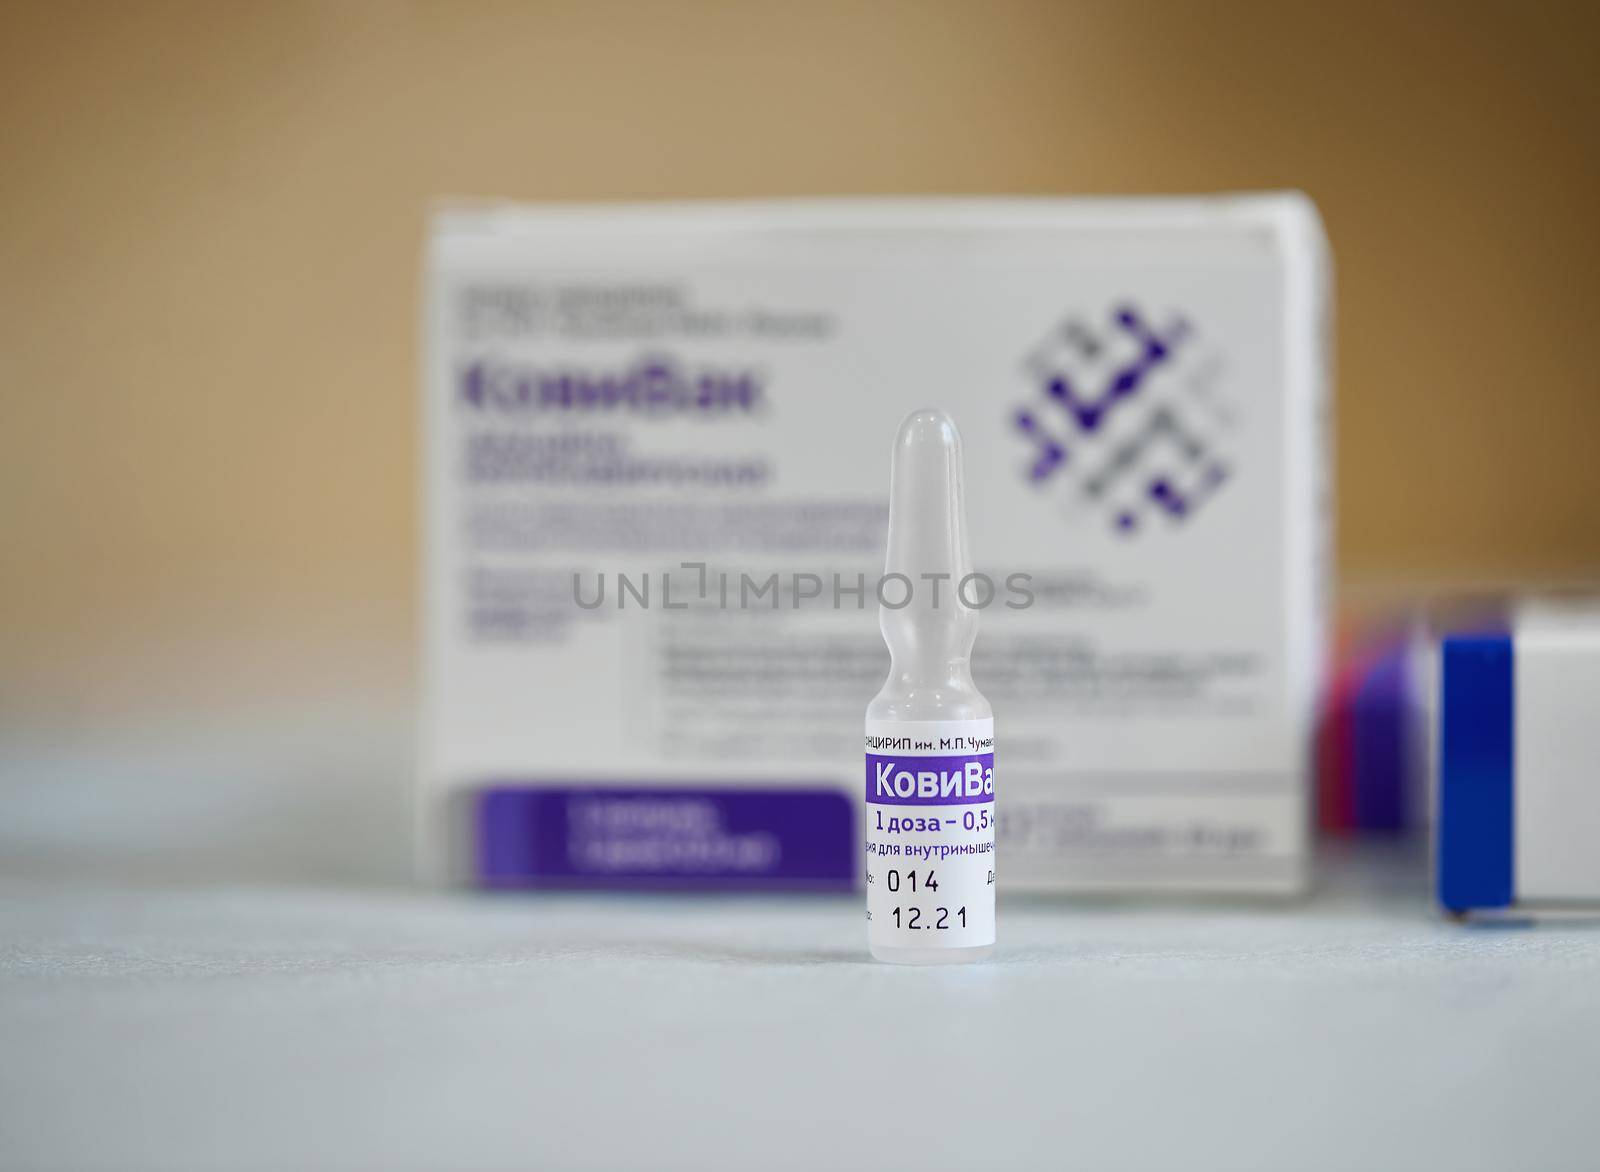 Box and ampoules with new Russian vaccine against coronavirus SARS-CoV-2, CoviVac. CoviVac is developed by the Chumakov Centre. Vaccine for prevention COVID-19. 26.08.2021, Moscow, Russia by EvgeniyQW